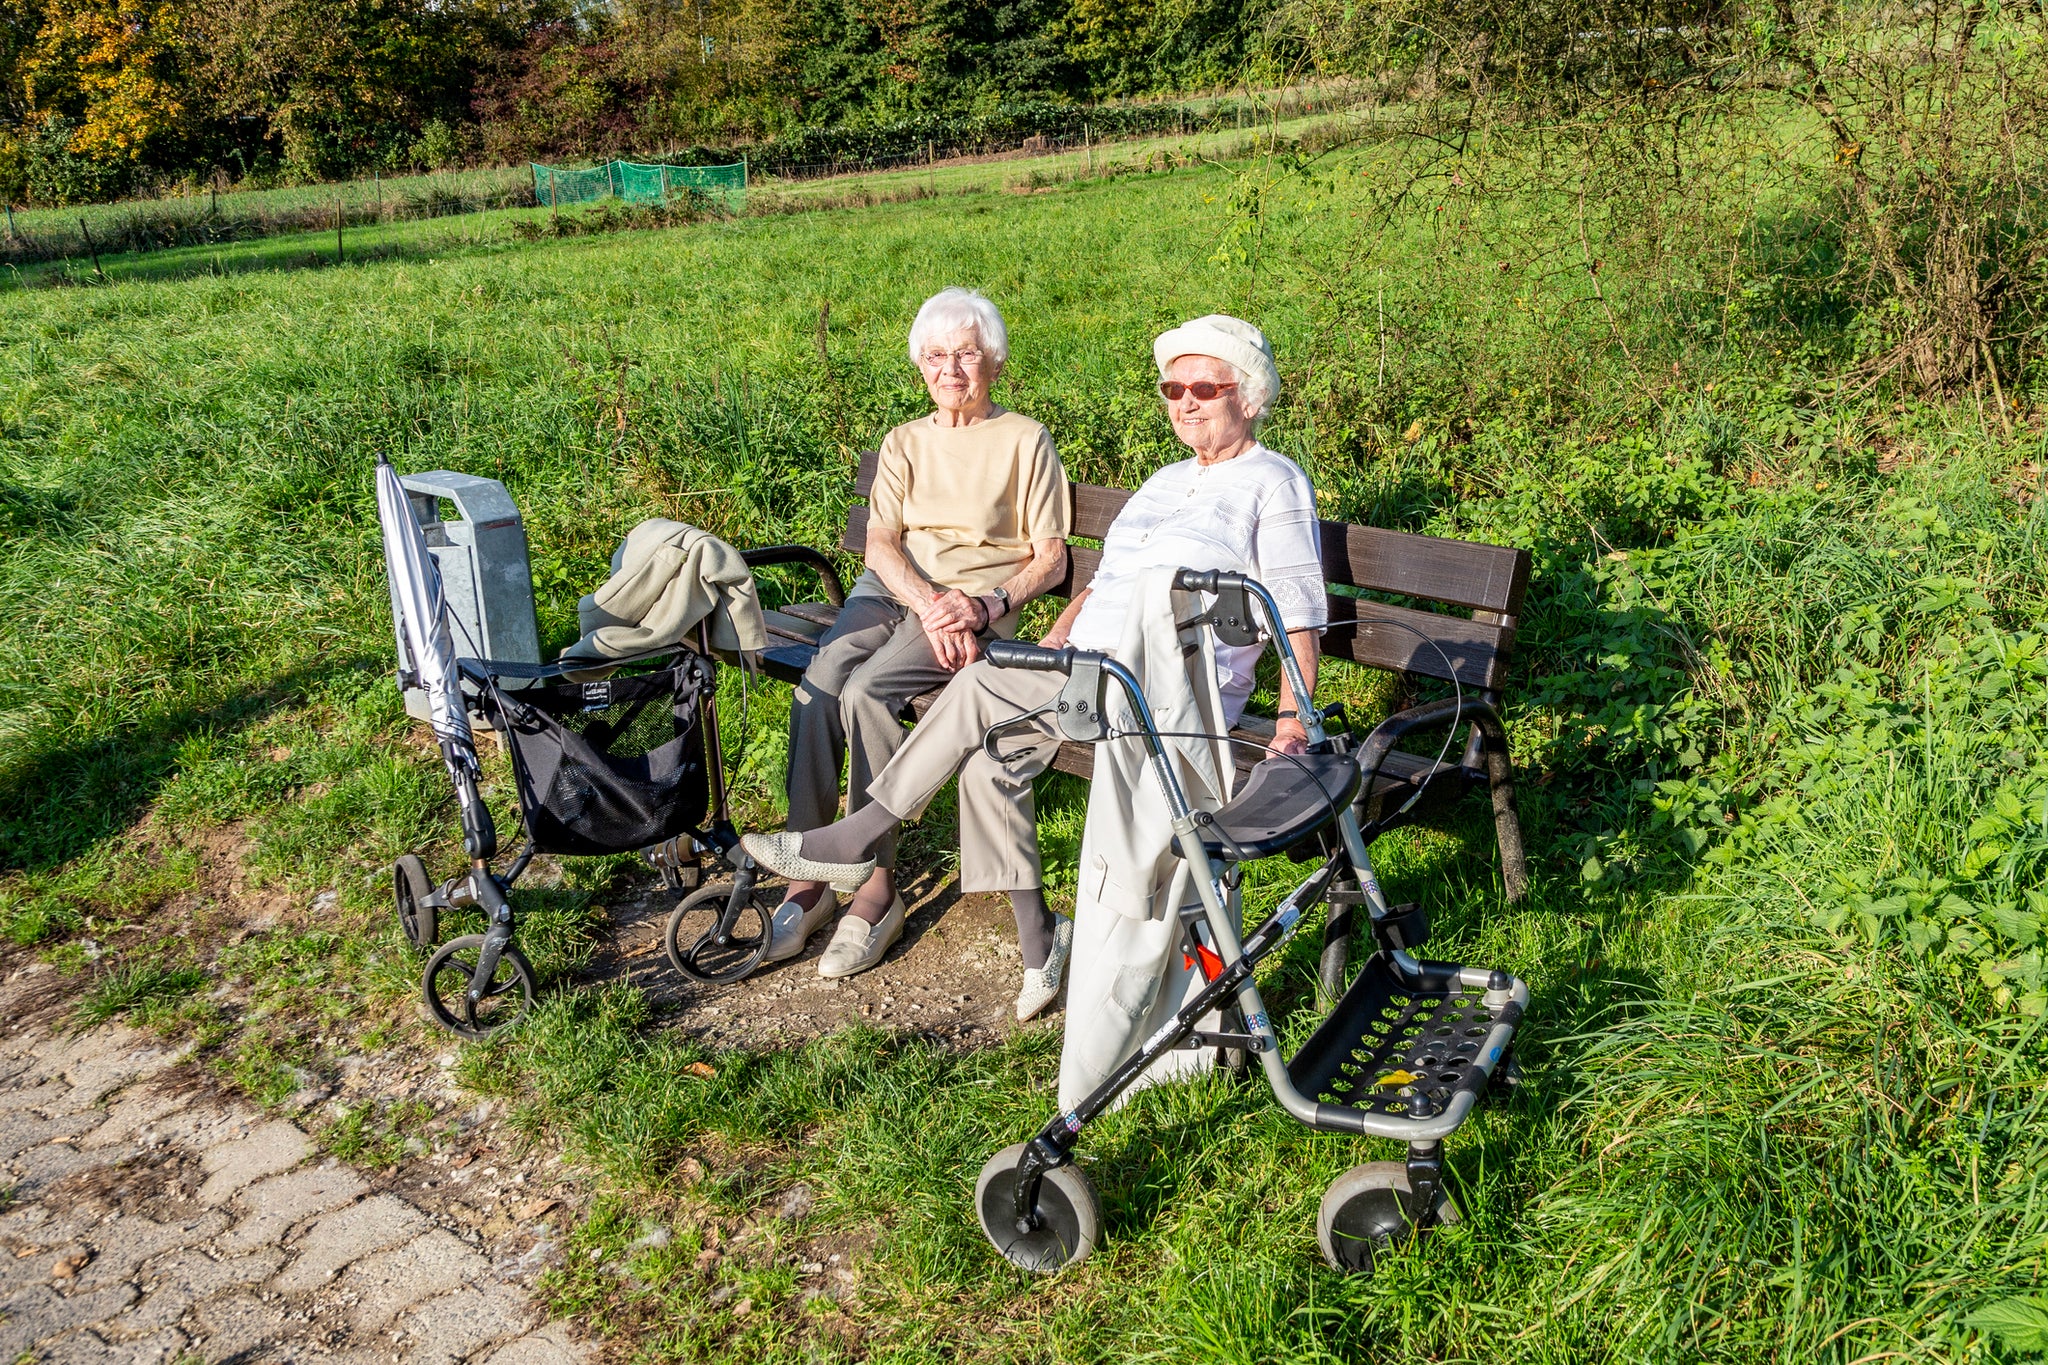 Two women with rollators on an uneven brick path.